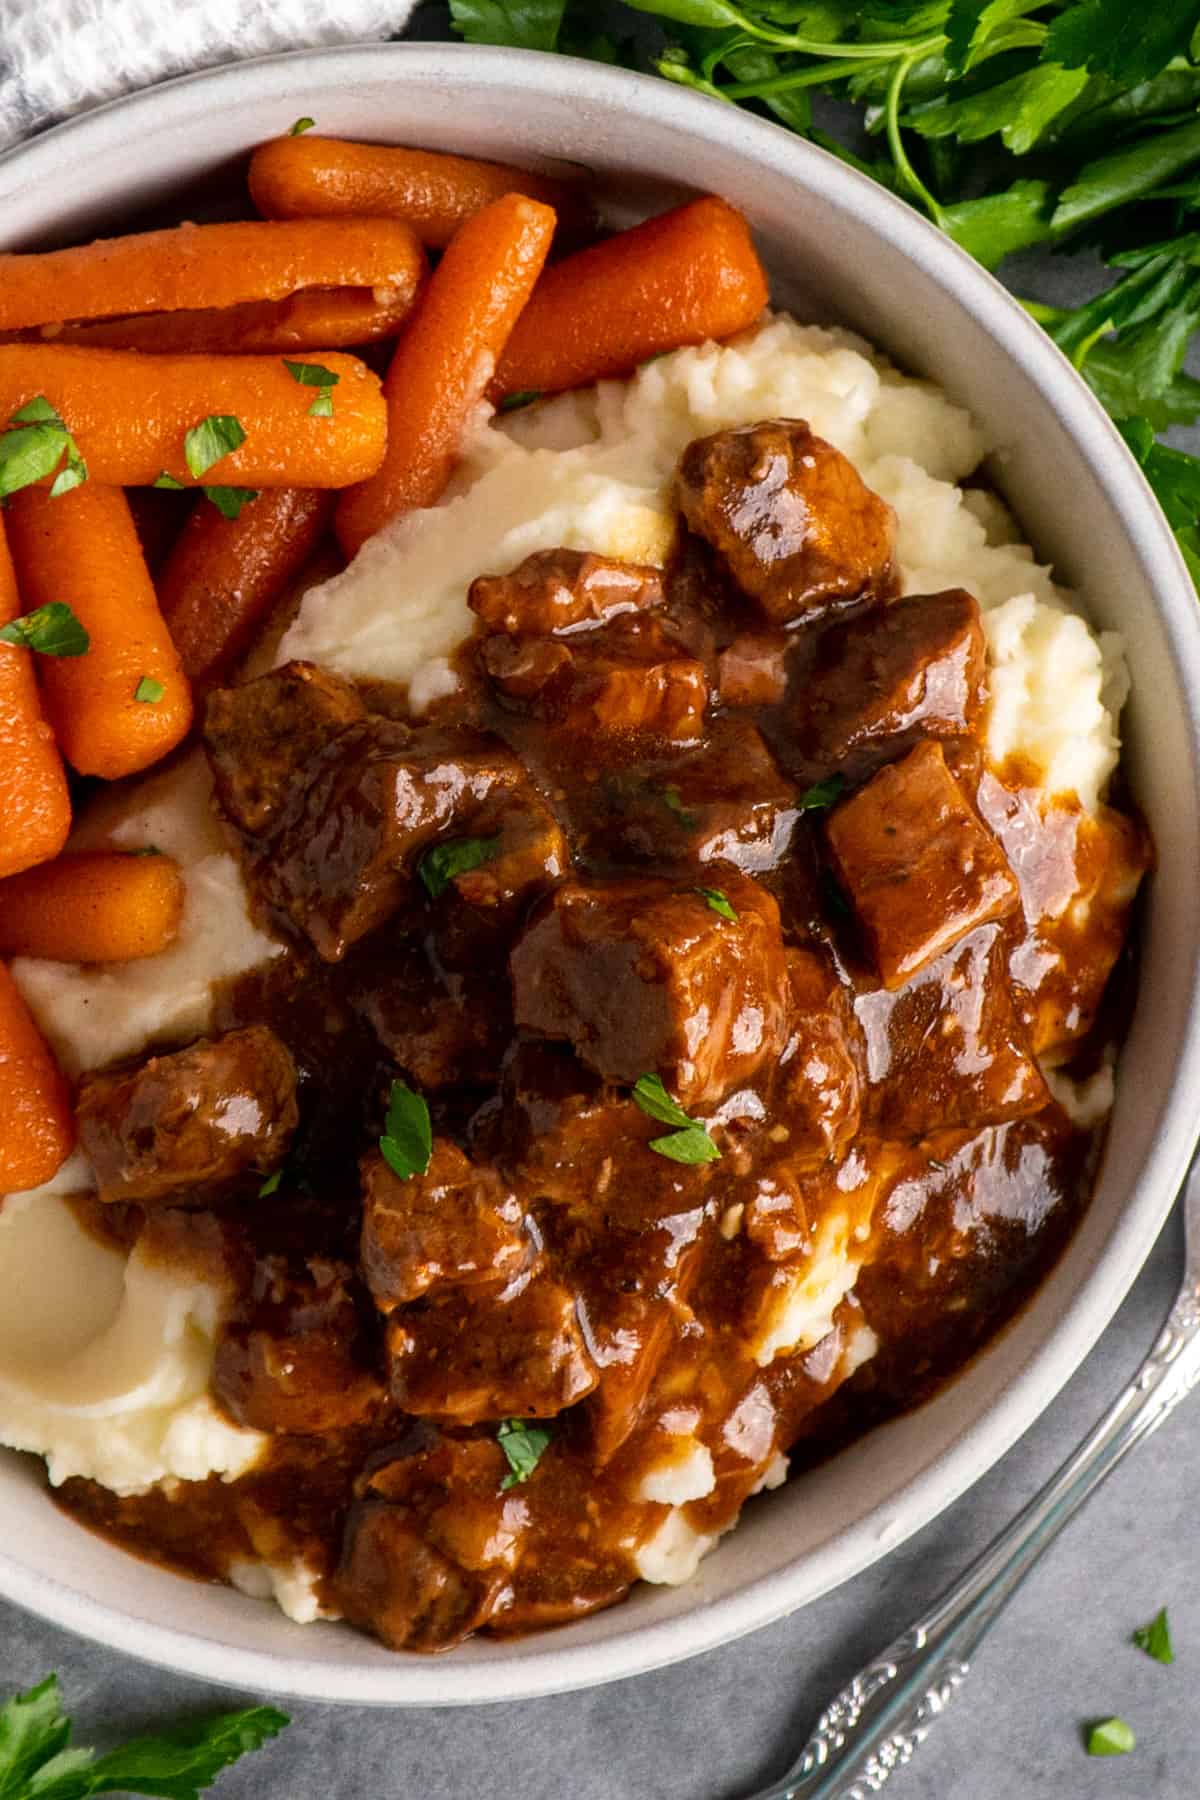 Overhead look at beef tips and gravy over mashed potatoes.